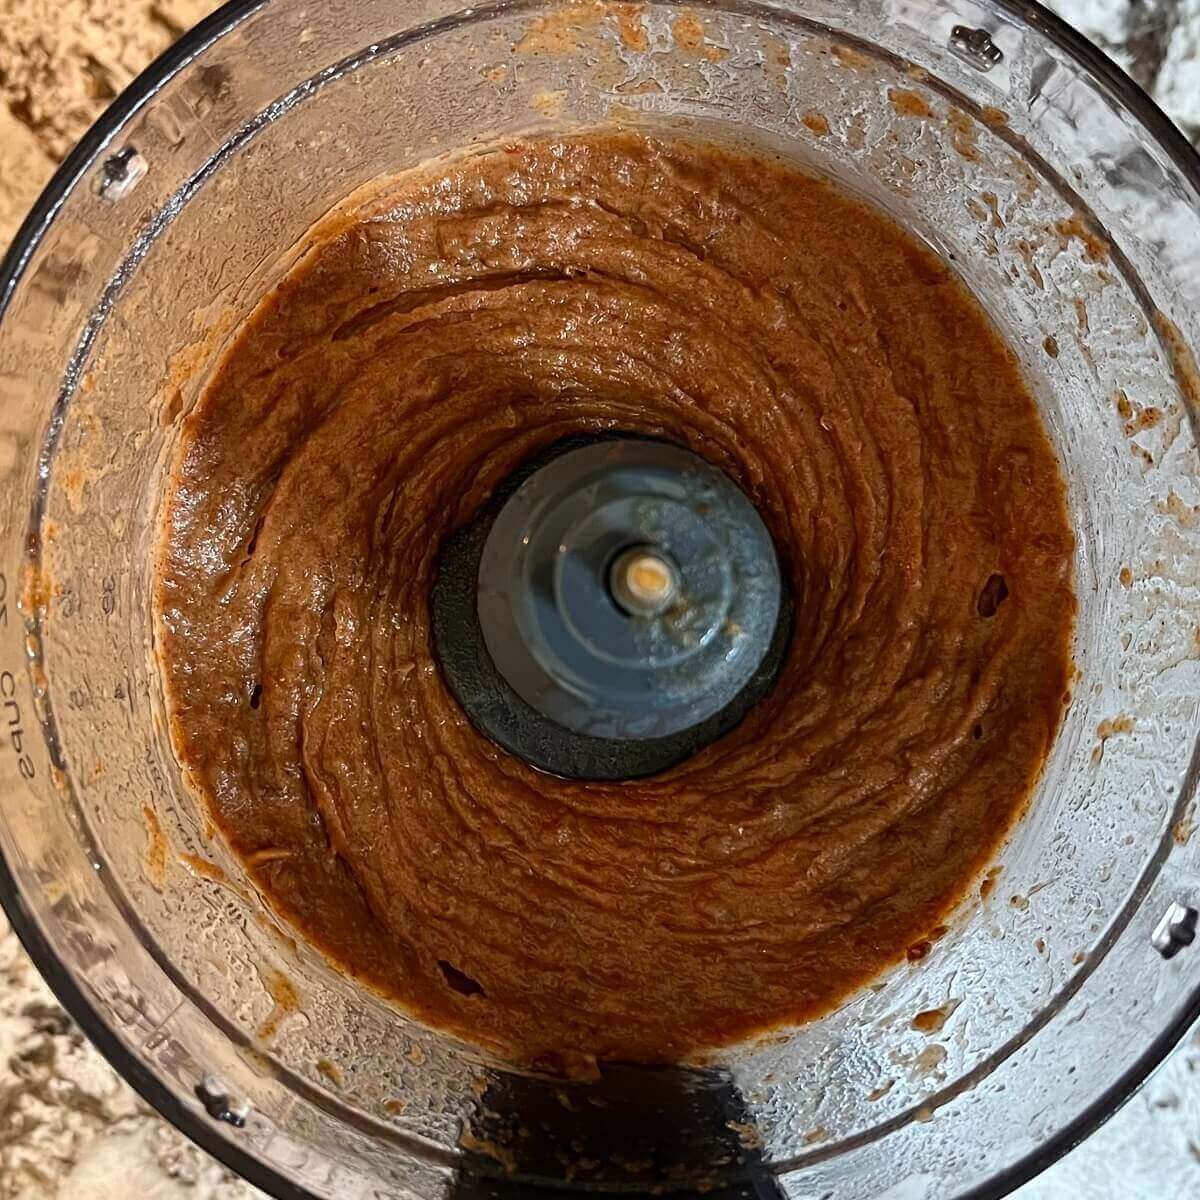 Blended mixture of dates and other ingredients in a food processor.